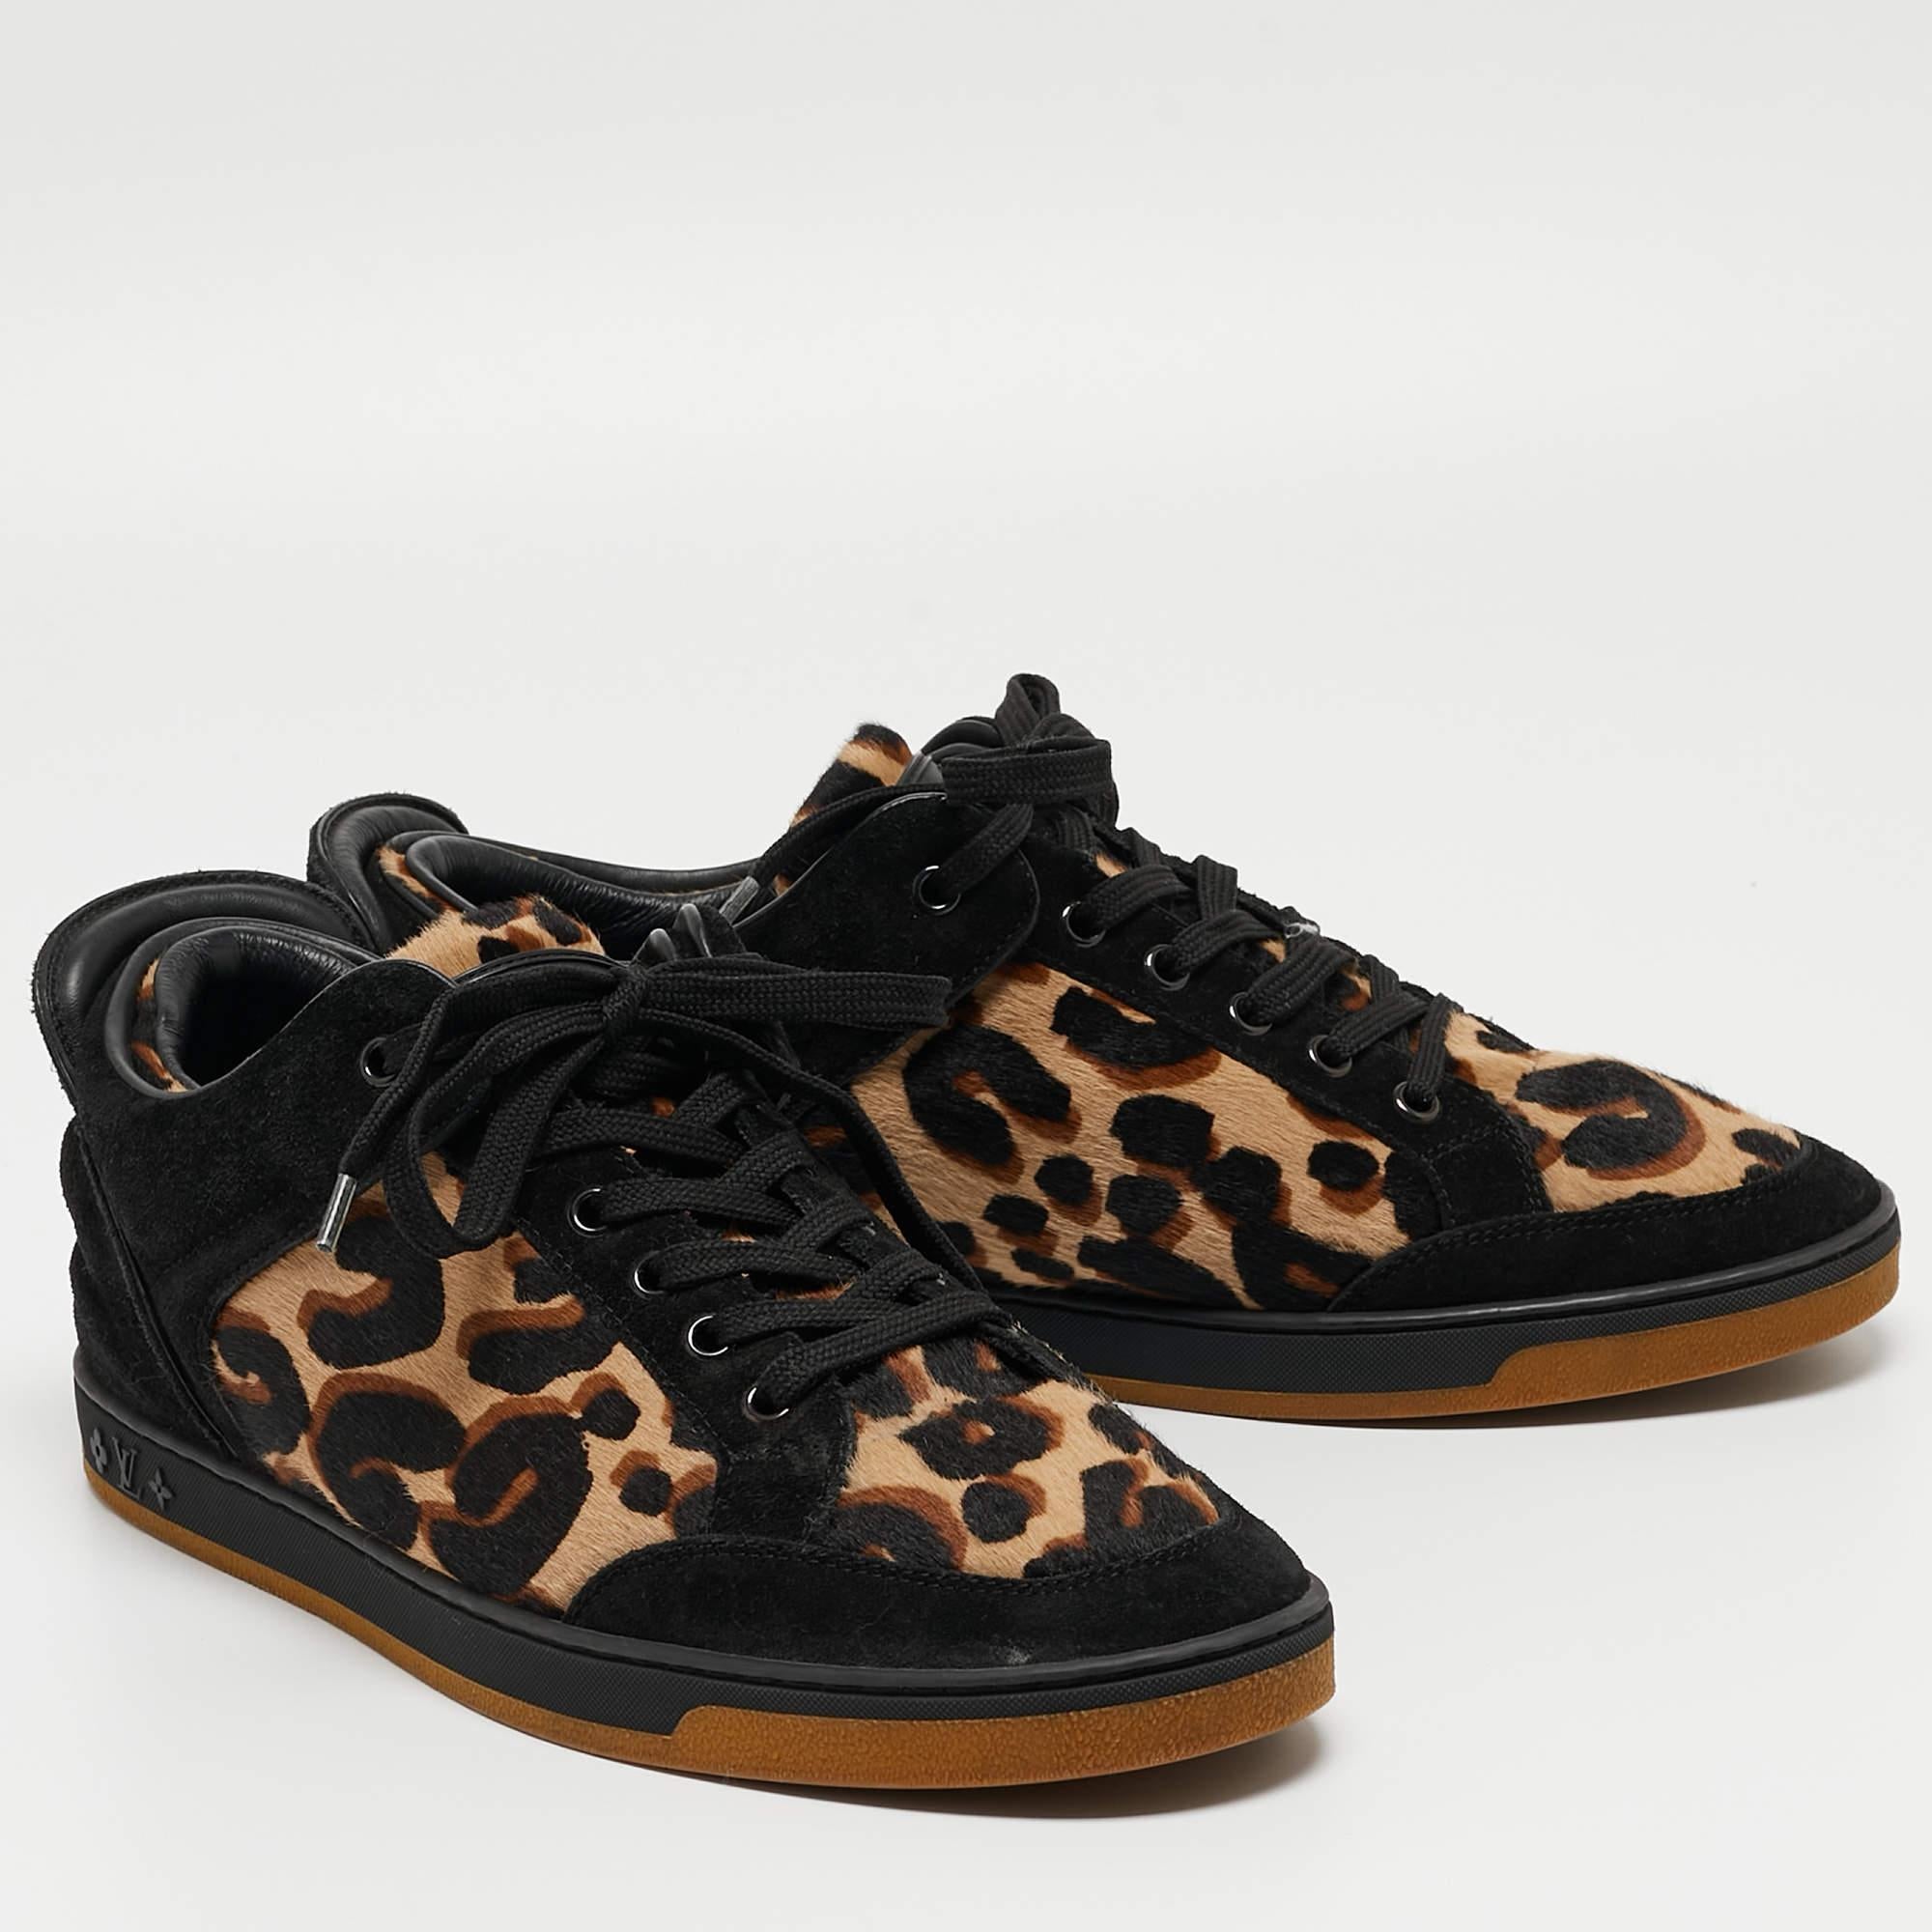 Louis Vuitton Black/Brown Calf Hair and Suede Low Top Sneakers Size 38.5 In Good Condition For Sale In Dubai, Al Qouz 2